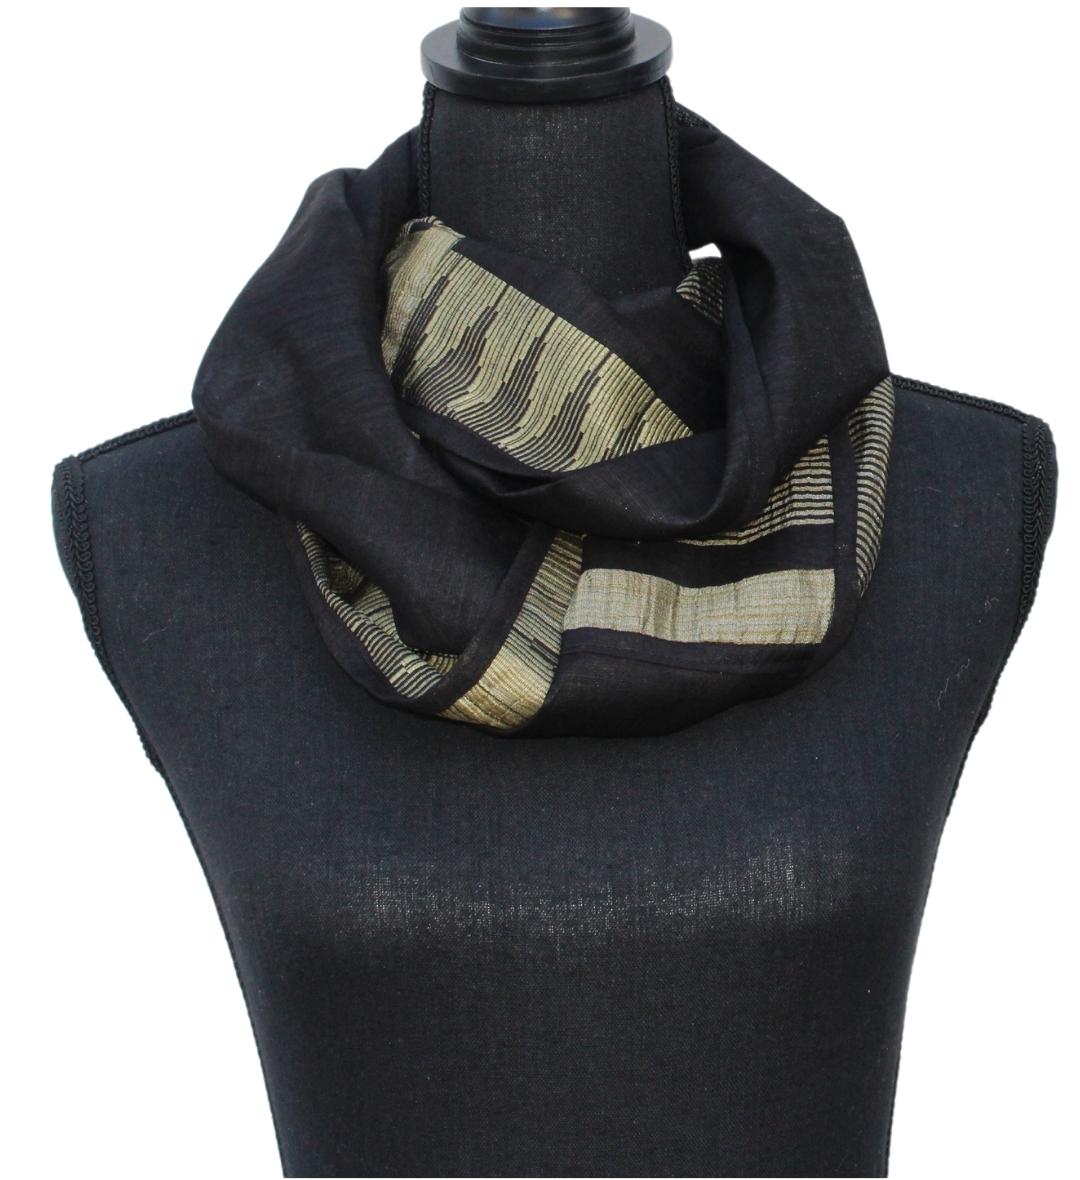 The Upcycled Silk Scarf Patterned - Black and Gold stripes